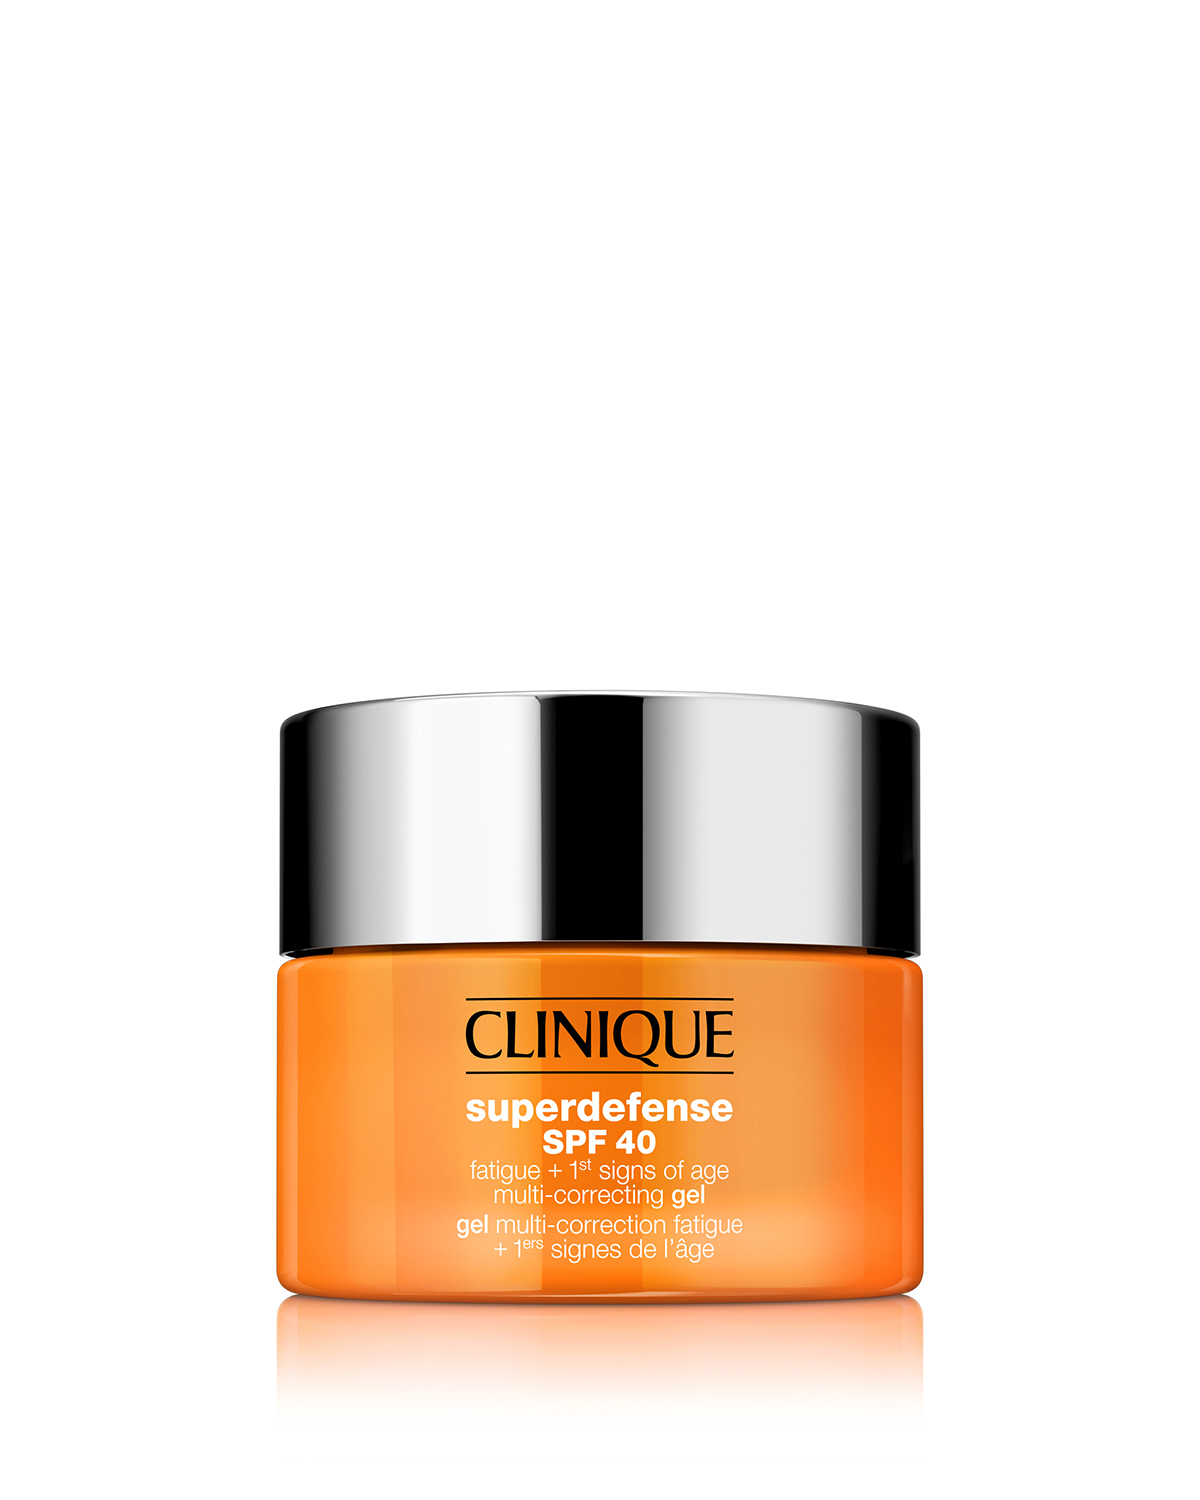 Clinique Superdefense SPF 40 Fatigue + 1st Signs of Age